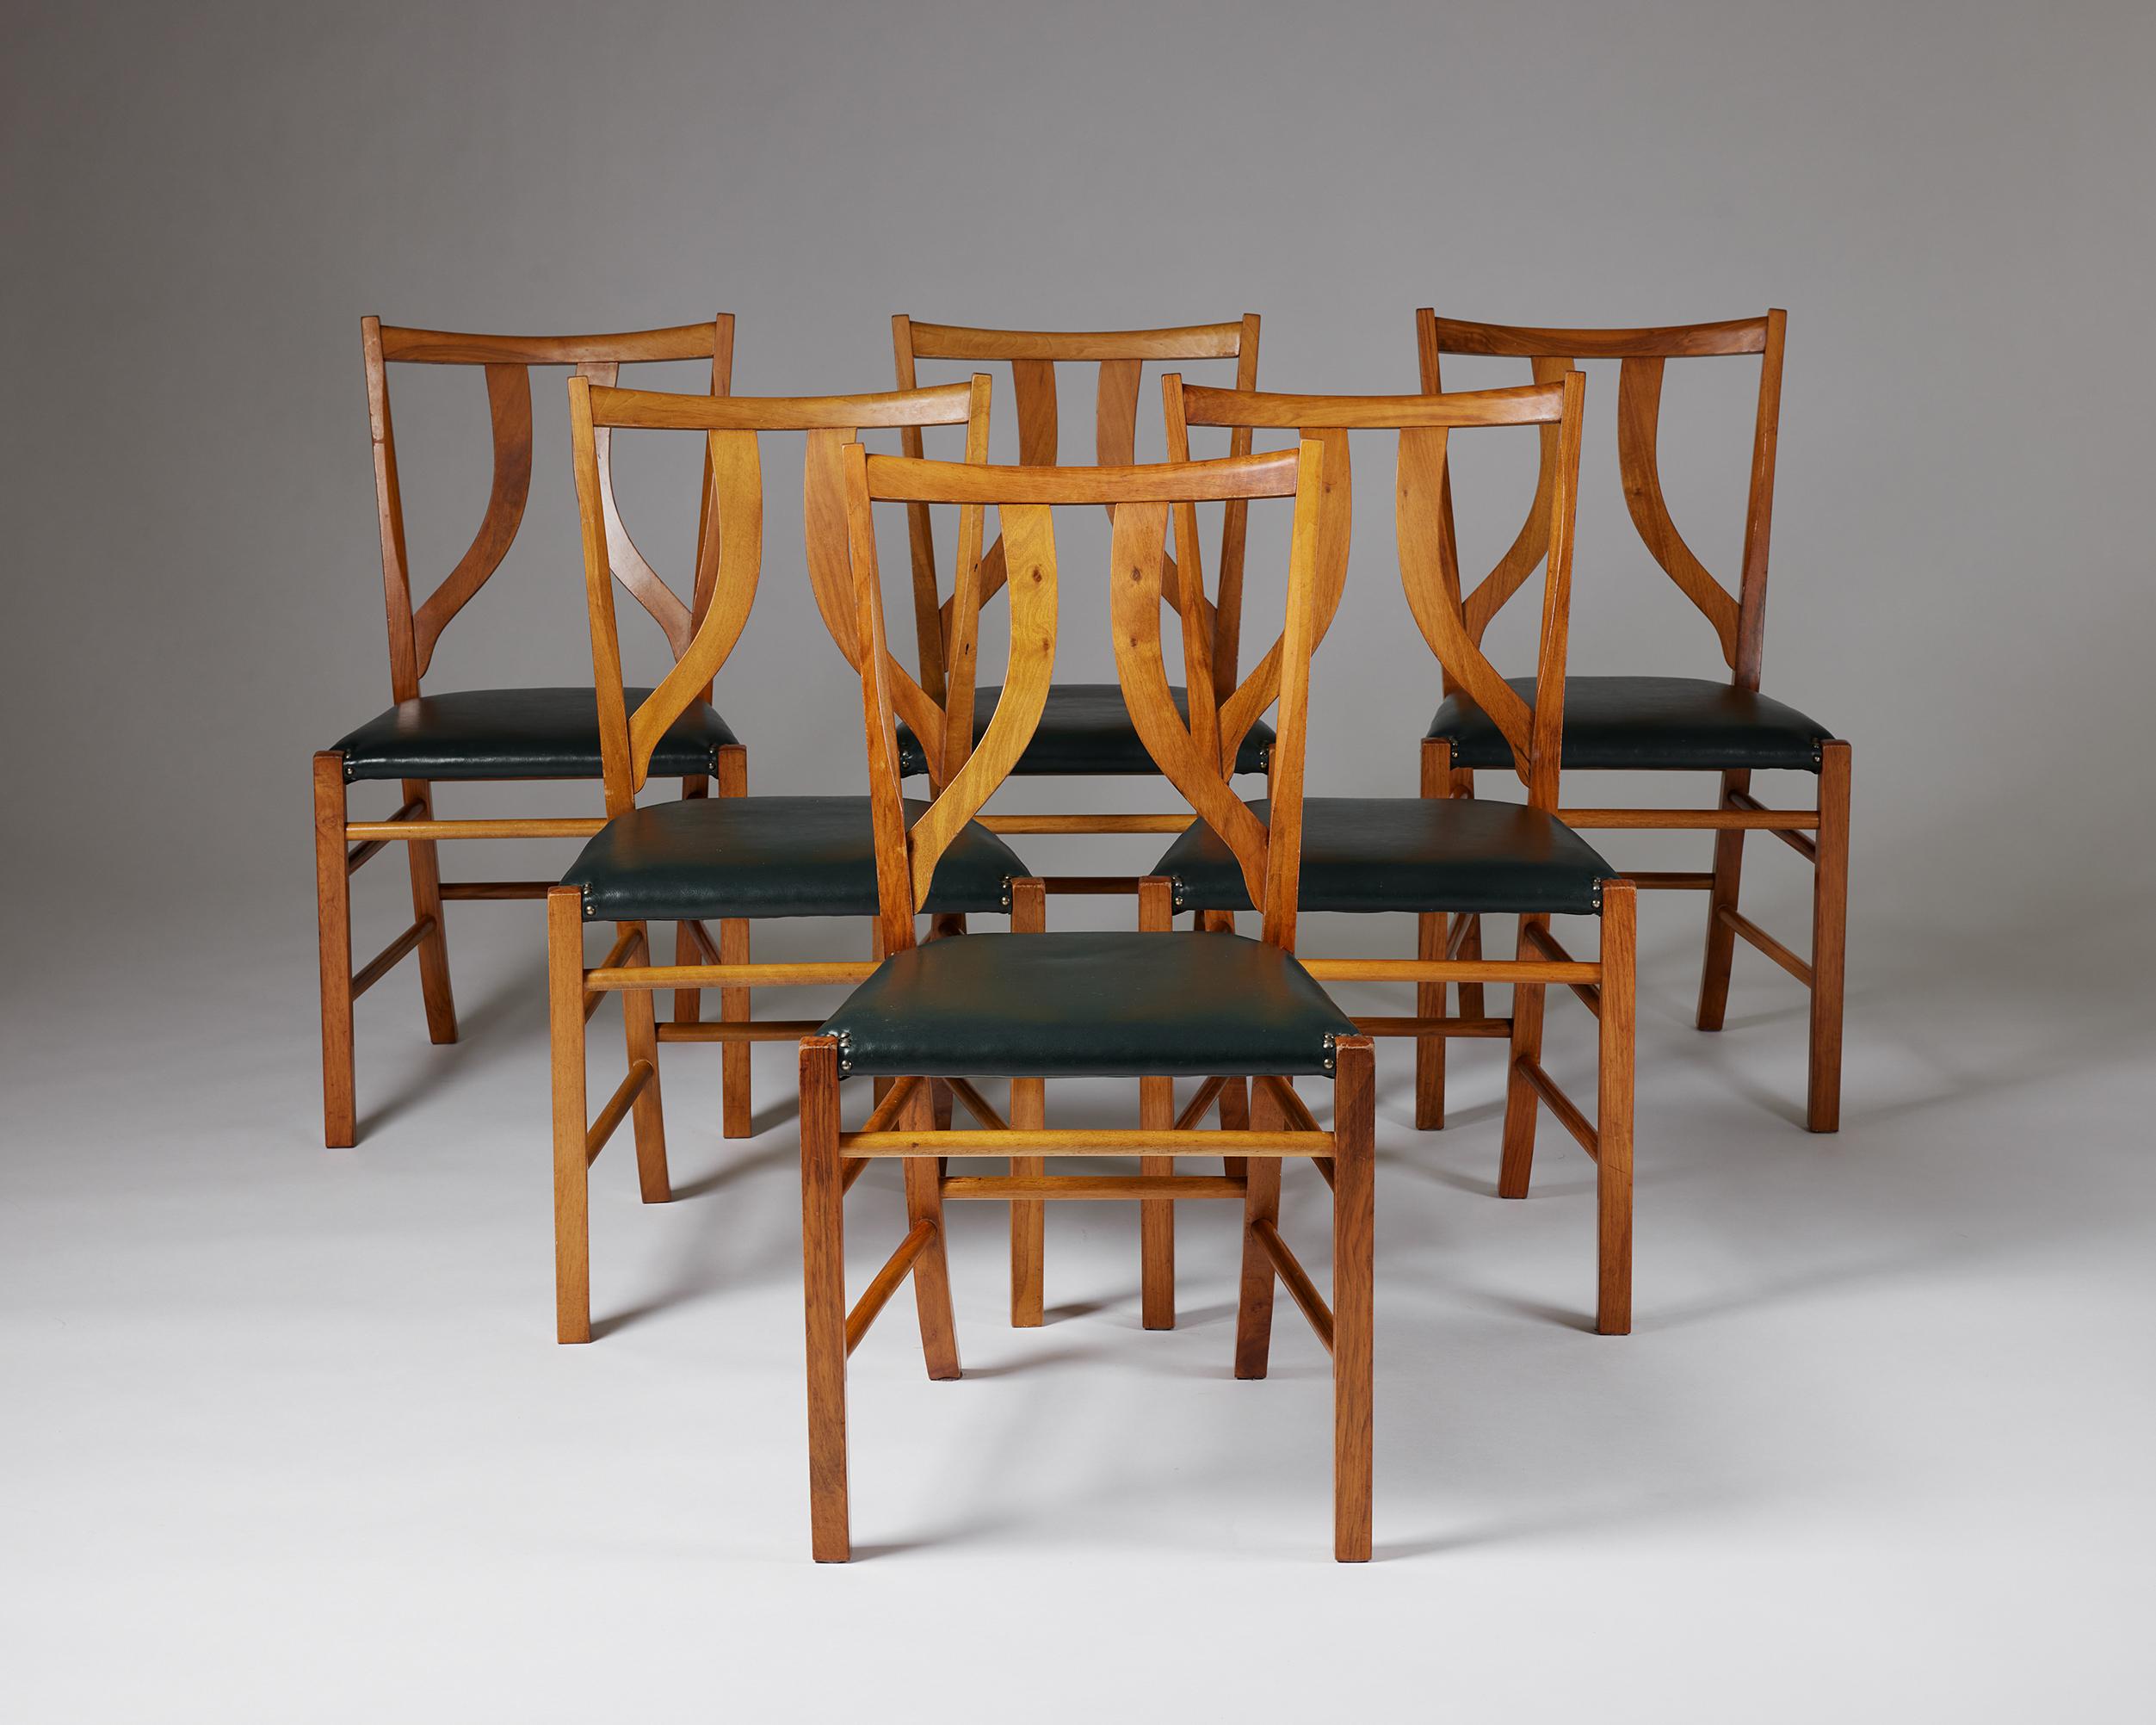 Set of six dining chairs model 2027 designed by Josef Frank for Svenskt Tenn,
Sweden, 1950s.

Mahogany, leather and brass.

Josef Frank developed his characteristic style combining elements of Viennese elegance with Swedish functionalism. He wanted